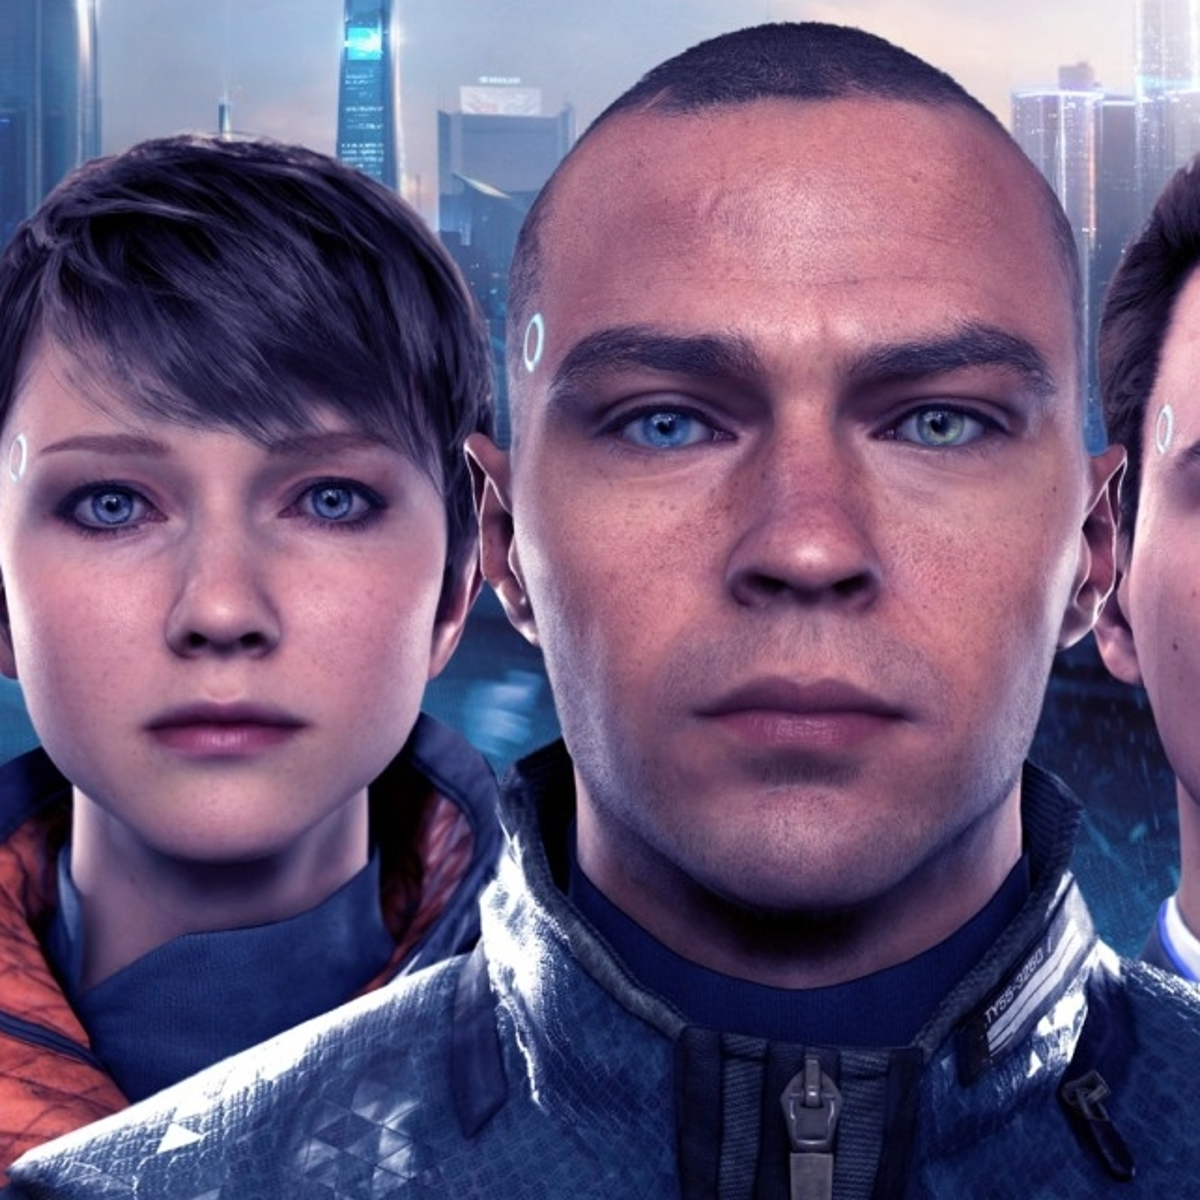 Detroit: Become Human beats State of Decay 2